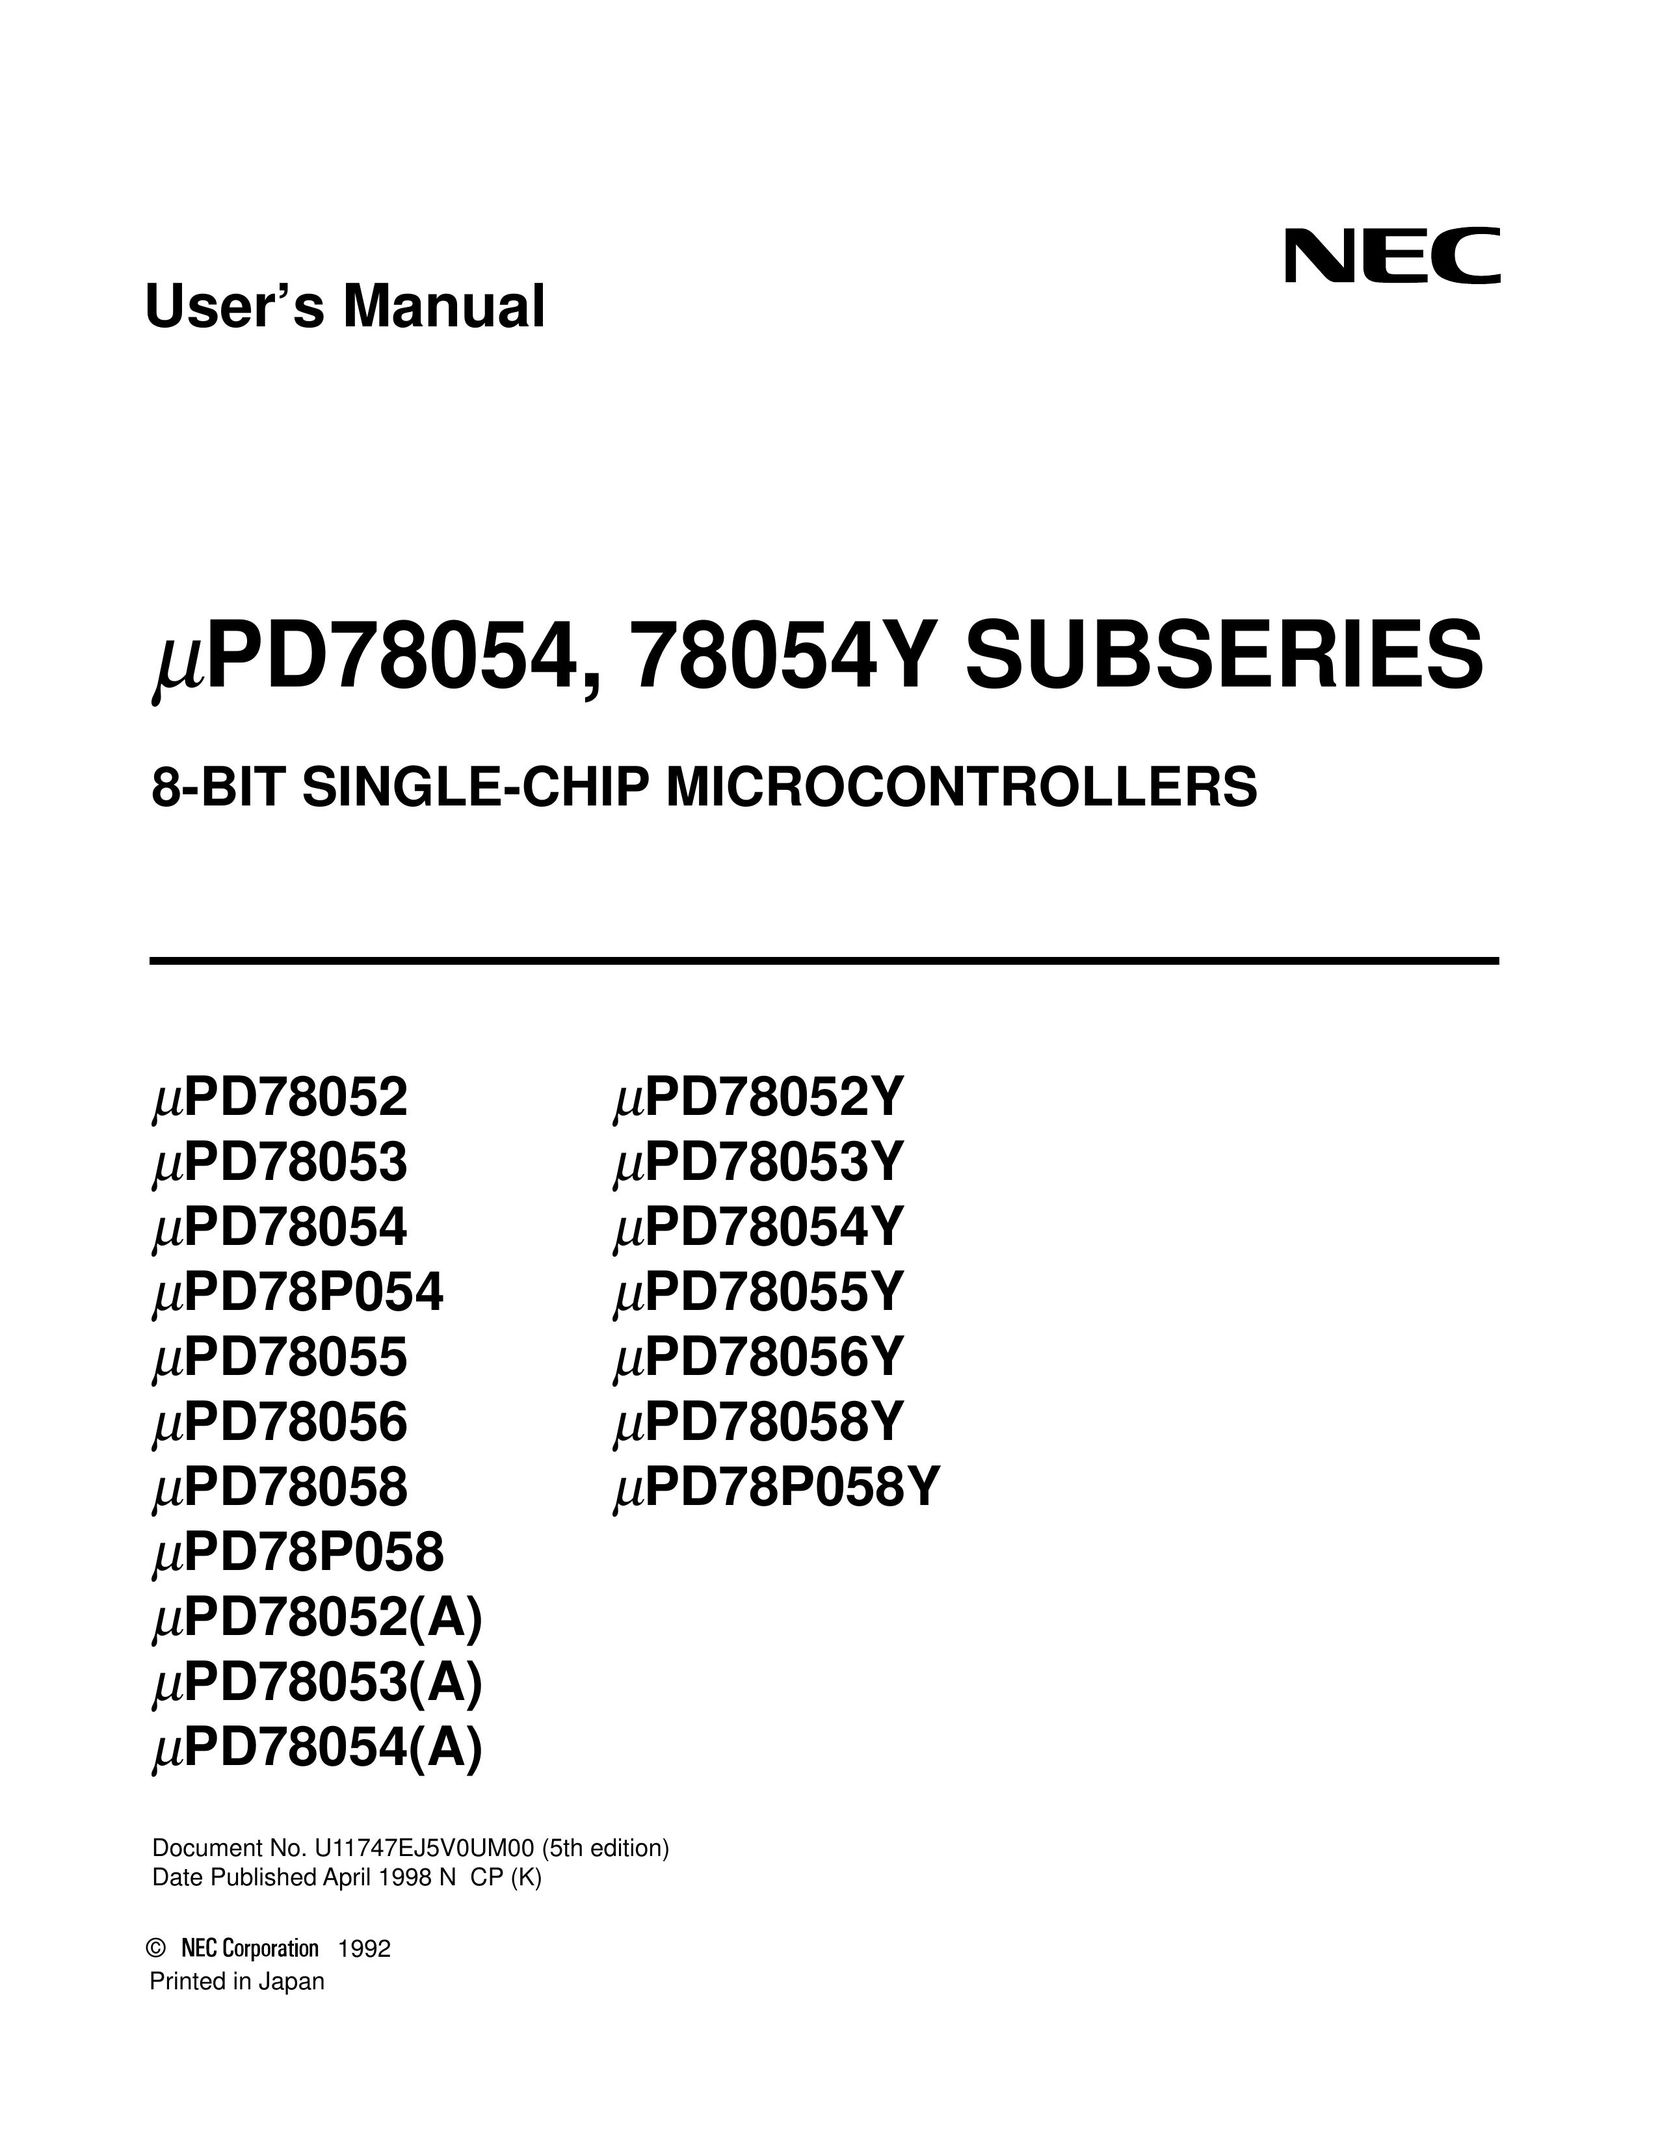 NEC PD78053Y Network Card User Manual